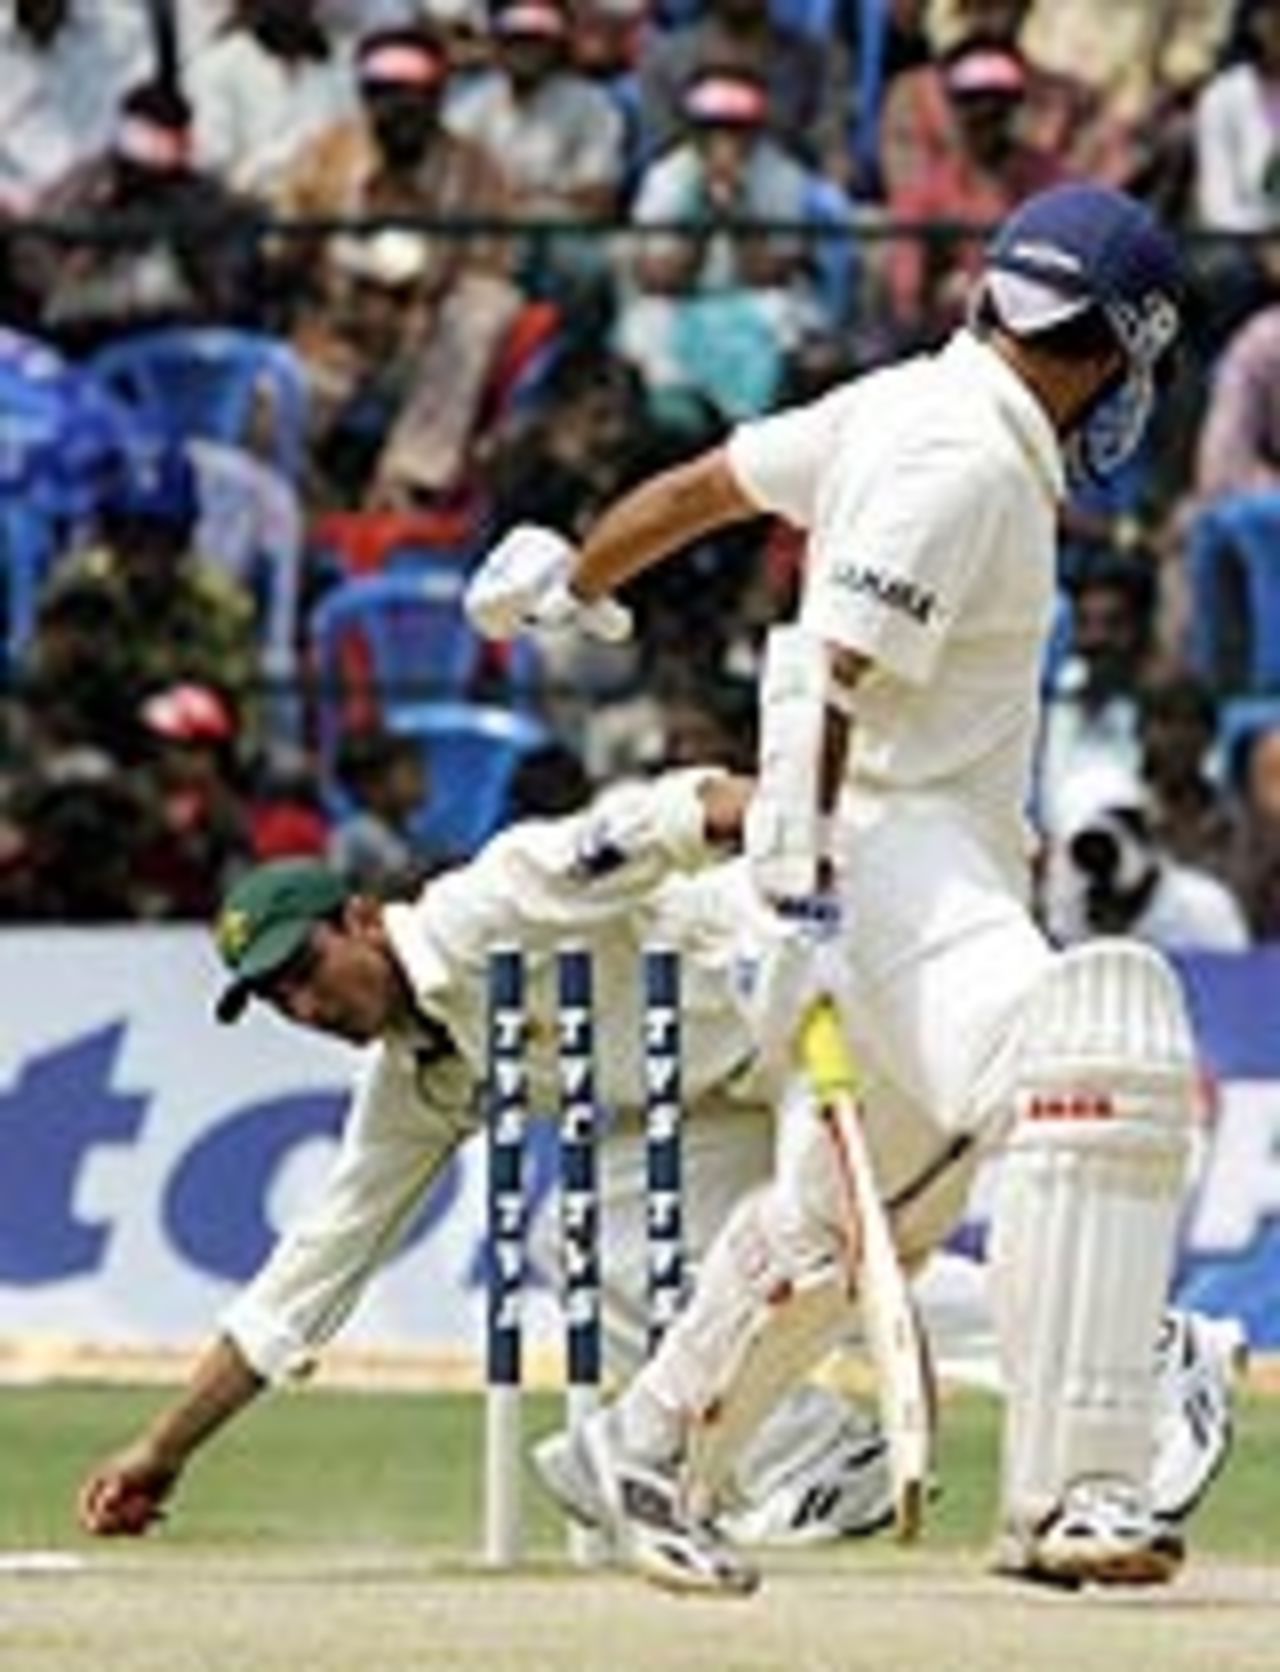 Sourav Ganguly sees his stumps knocked over by Shahid Afridi, India v Pakistan, 3rd Test, Bangalore, 5th day, March 28, 2005